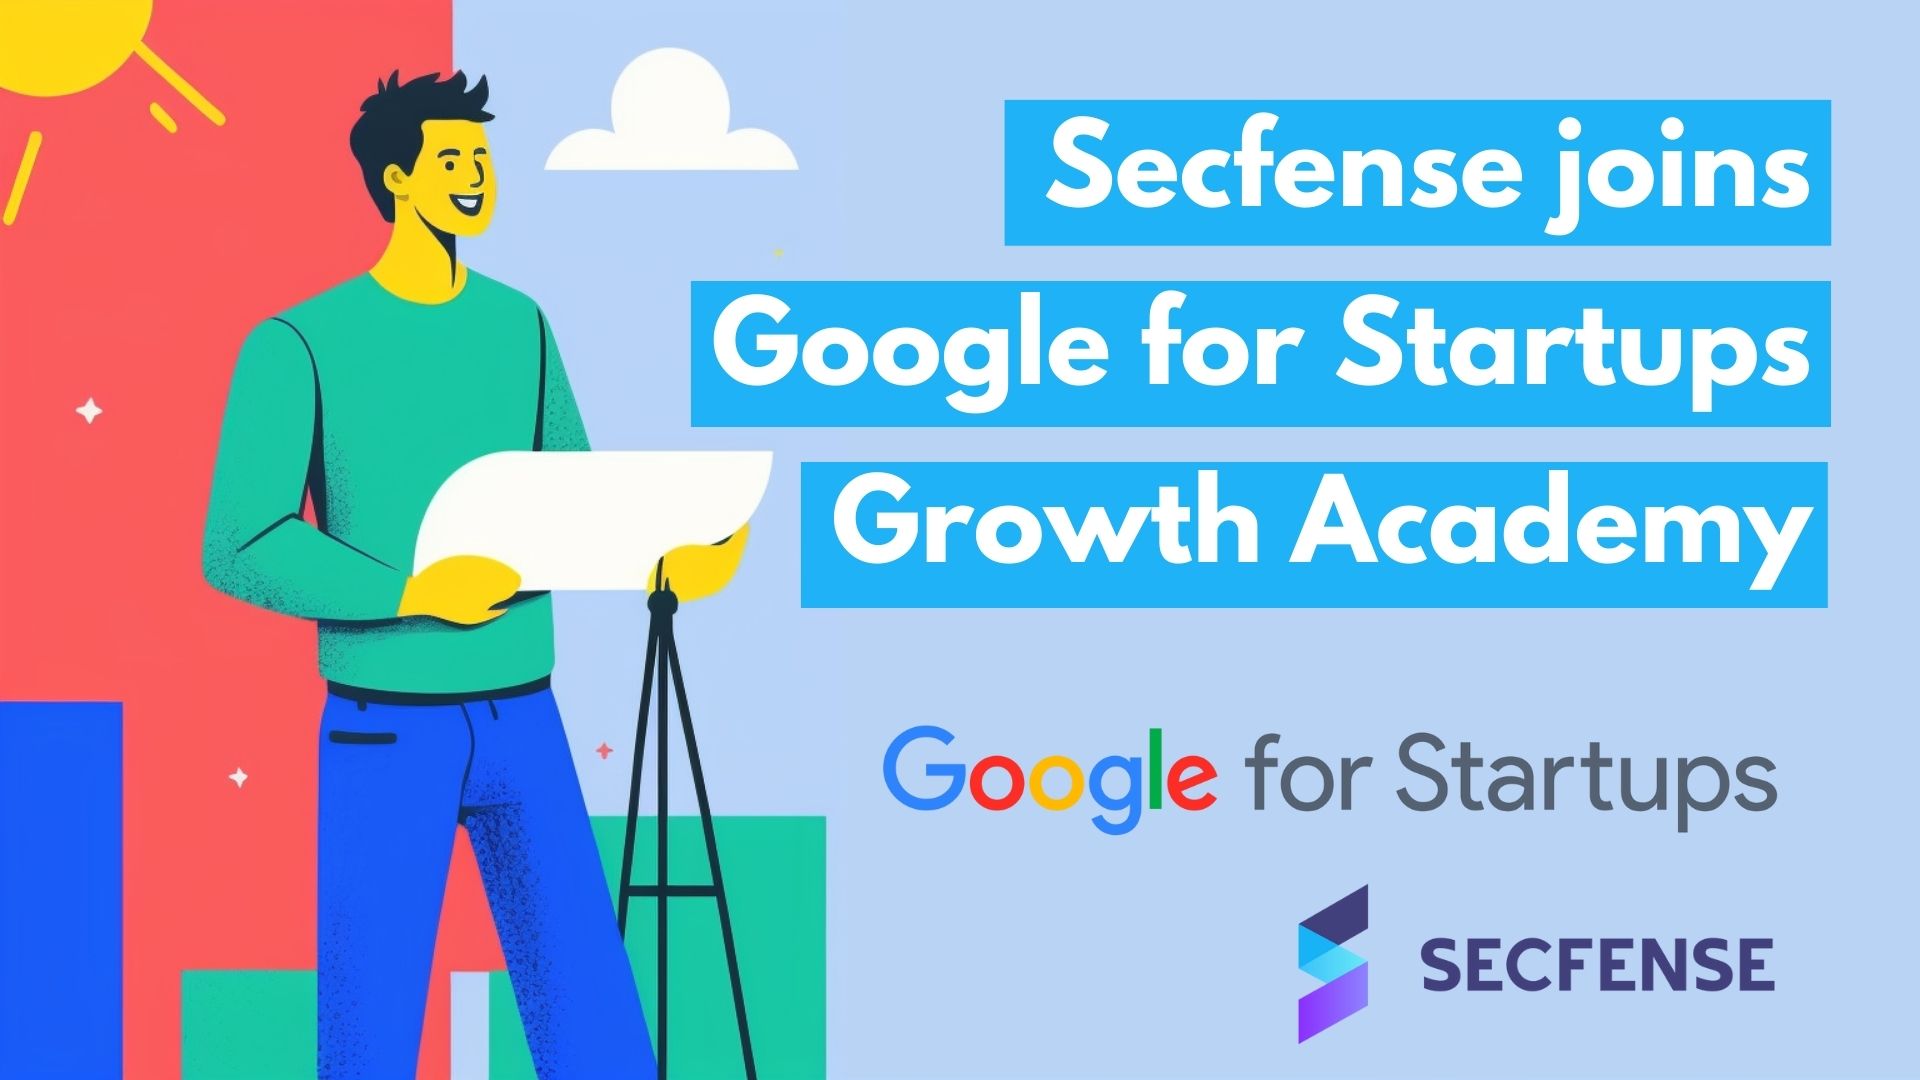 Secfense joins Google for Startups Growth Academy